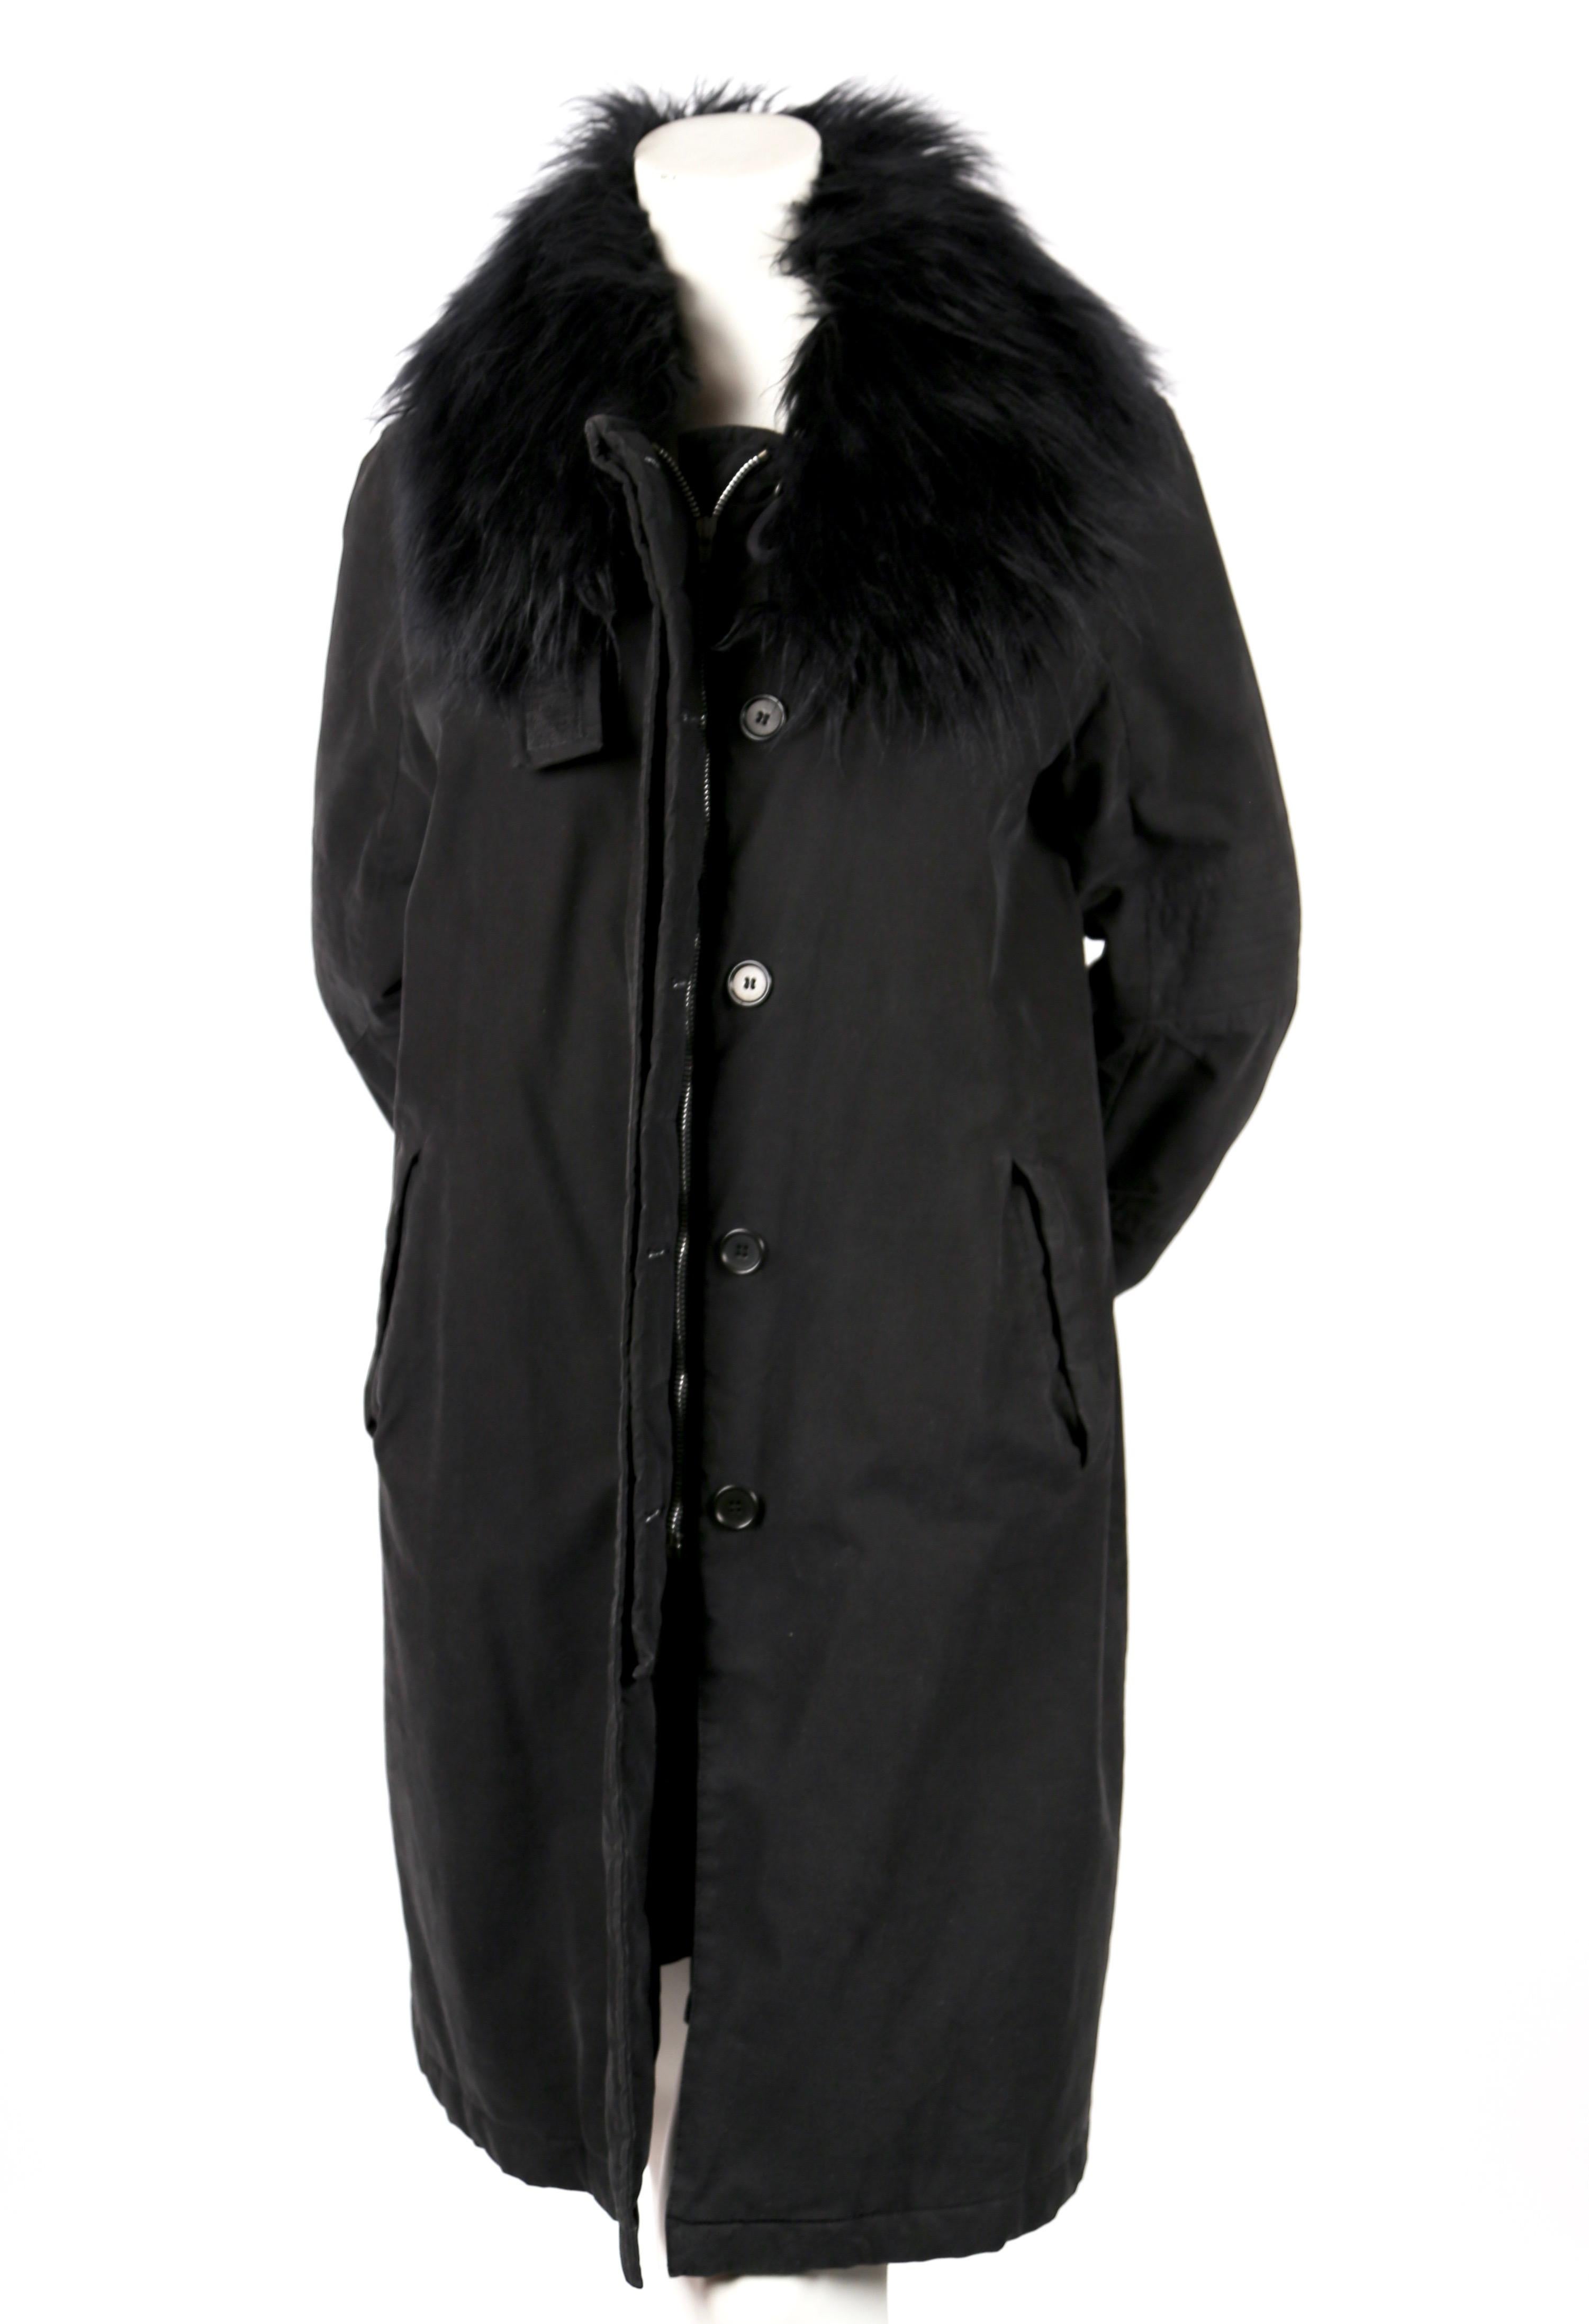 Vintage-black, cotton 'astro' biker coat with faux fur collar and shoulder and leg bondage straps designed by Helmut Lang as seen on the fall 1999 runway. Italian size 40. Approximate measurements: shoulder 16.5